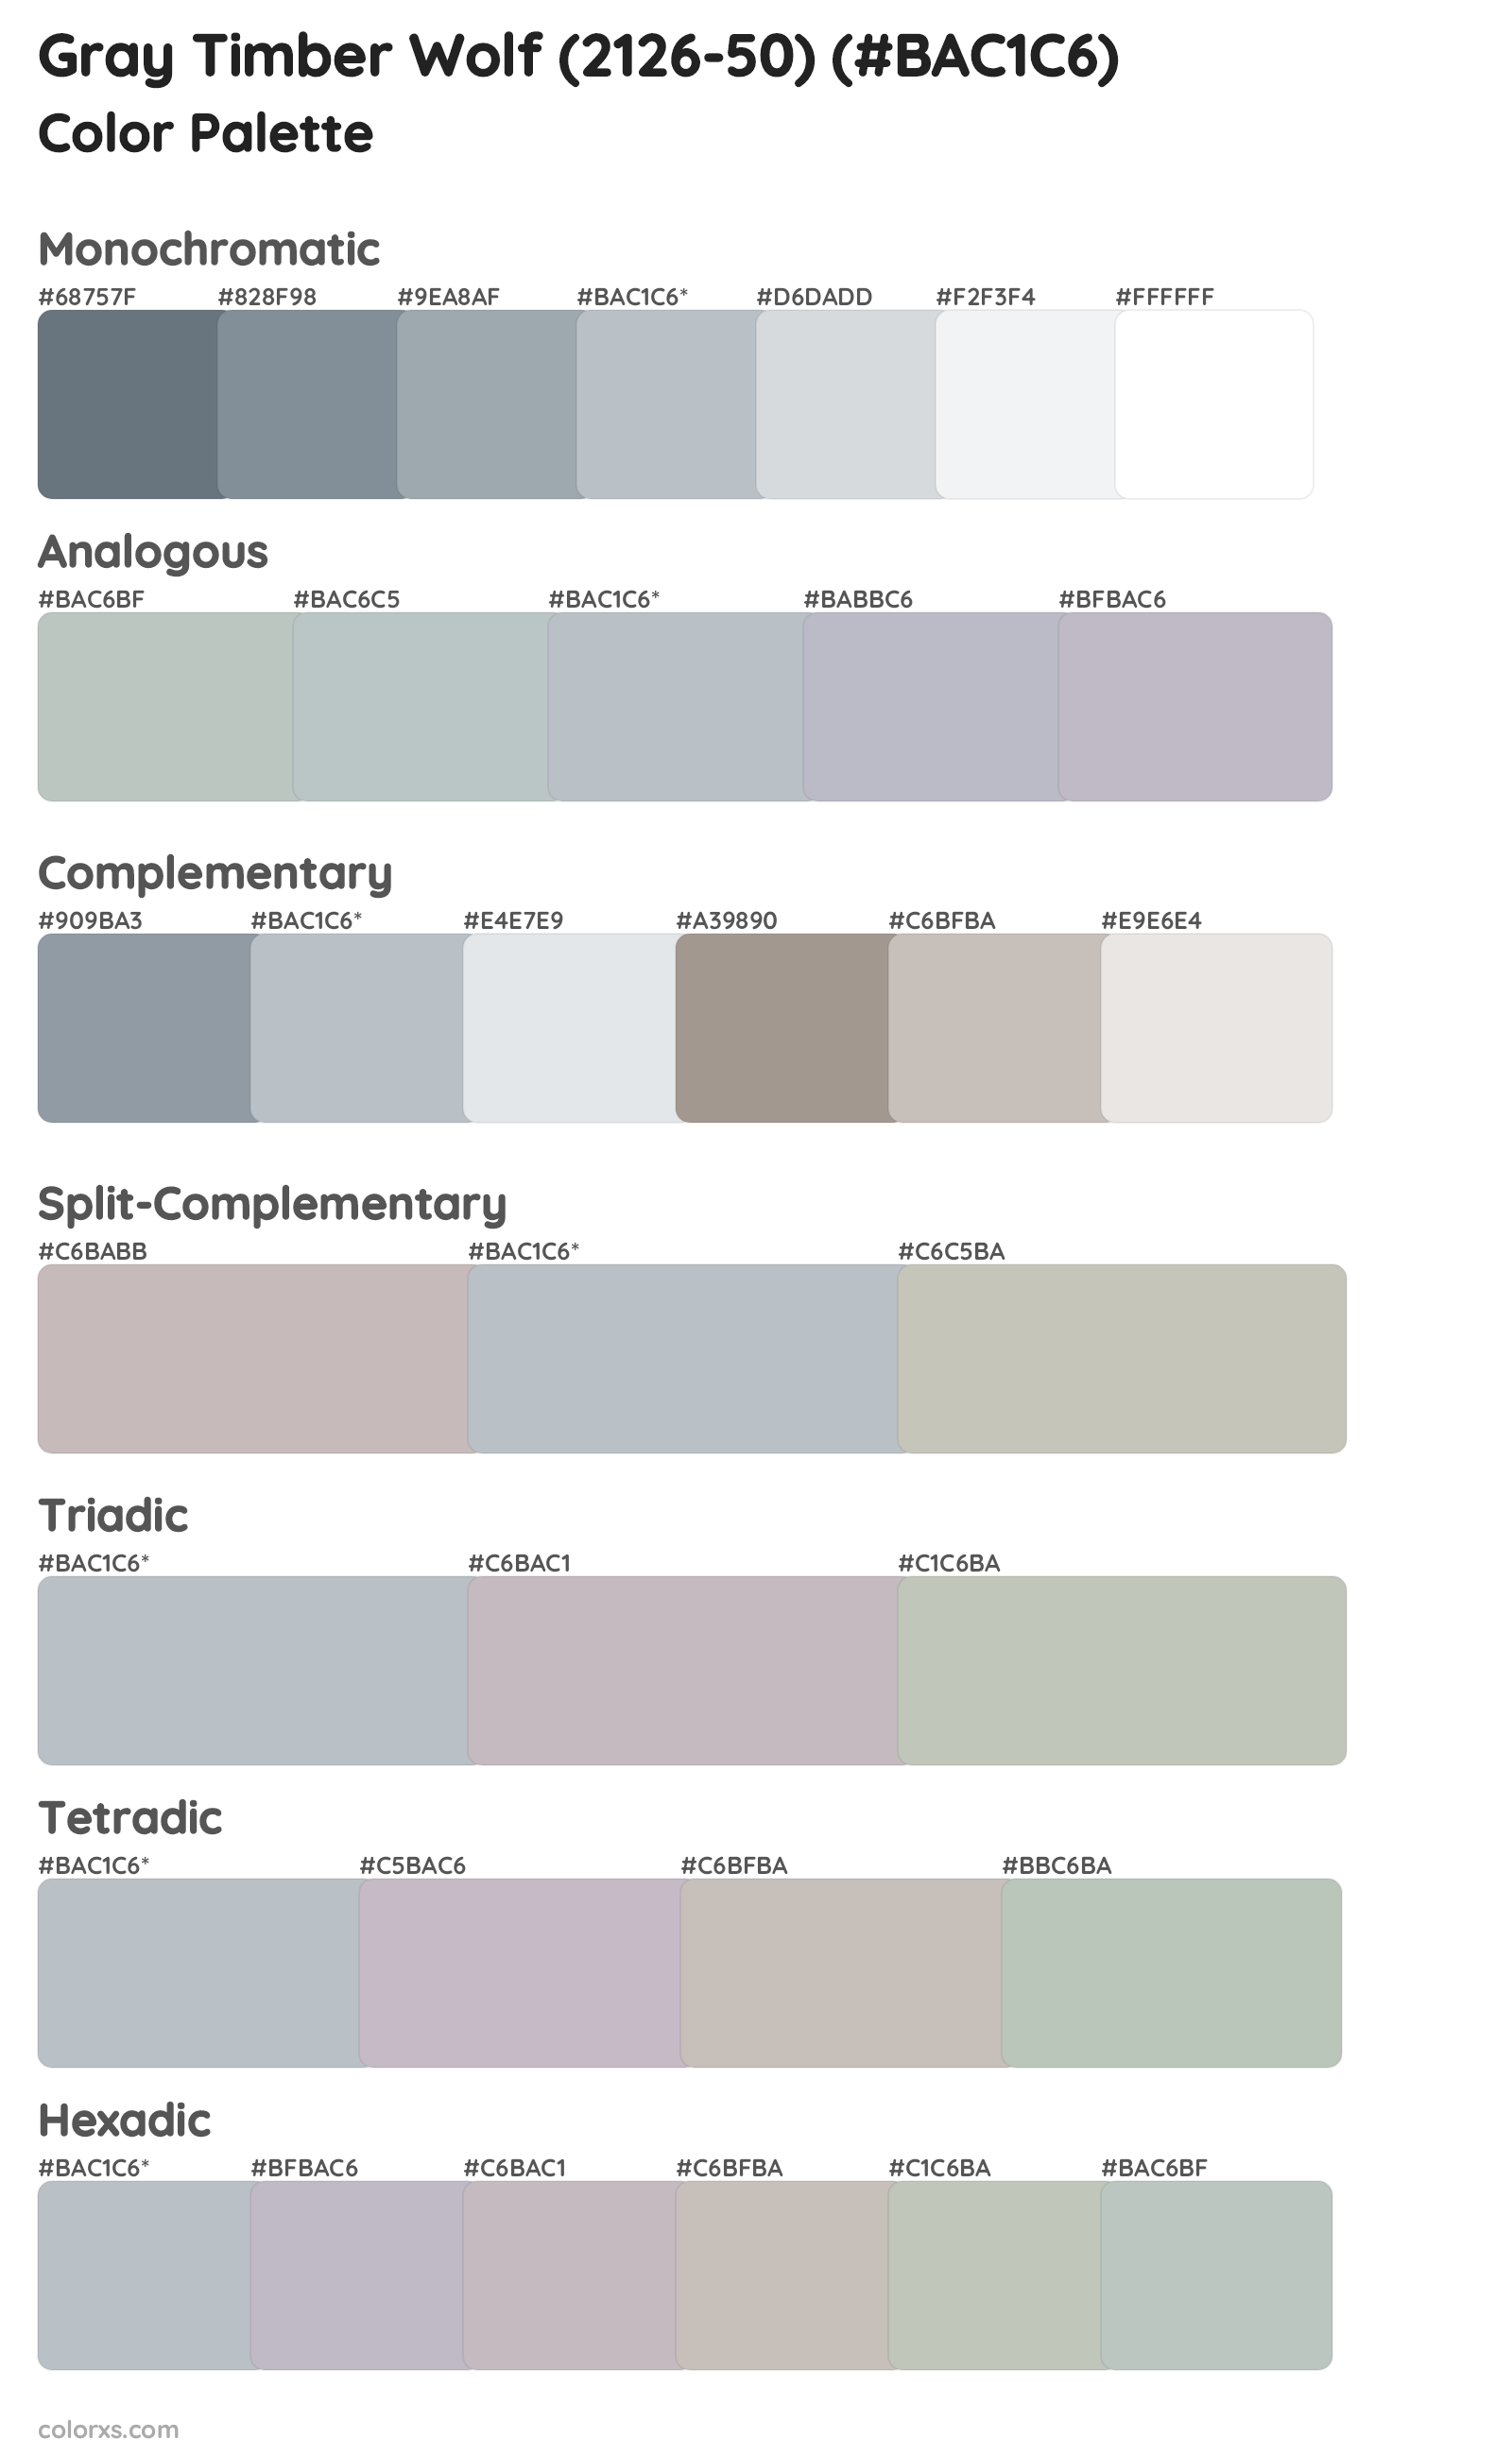 Gray Timber Wolf (2126-50) Color Scheme Palettes